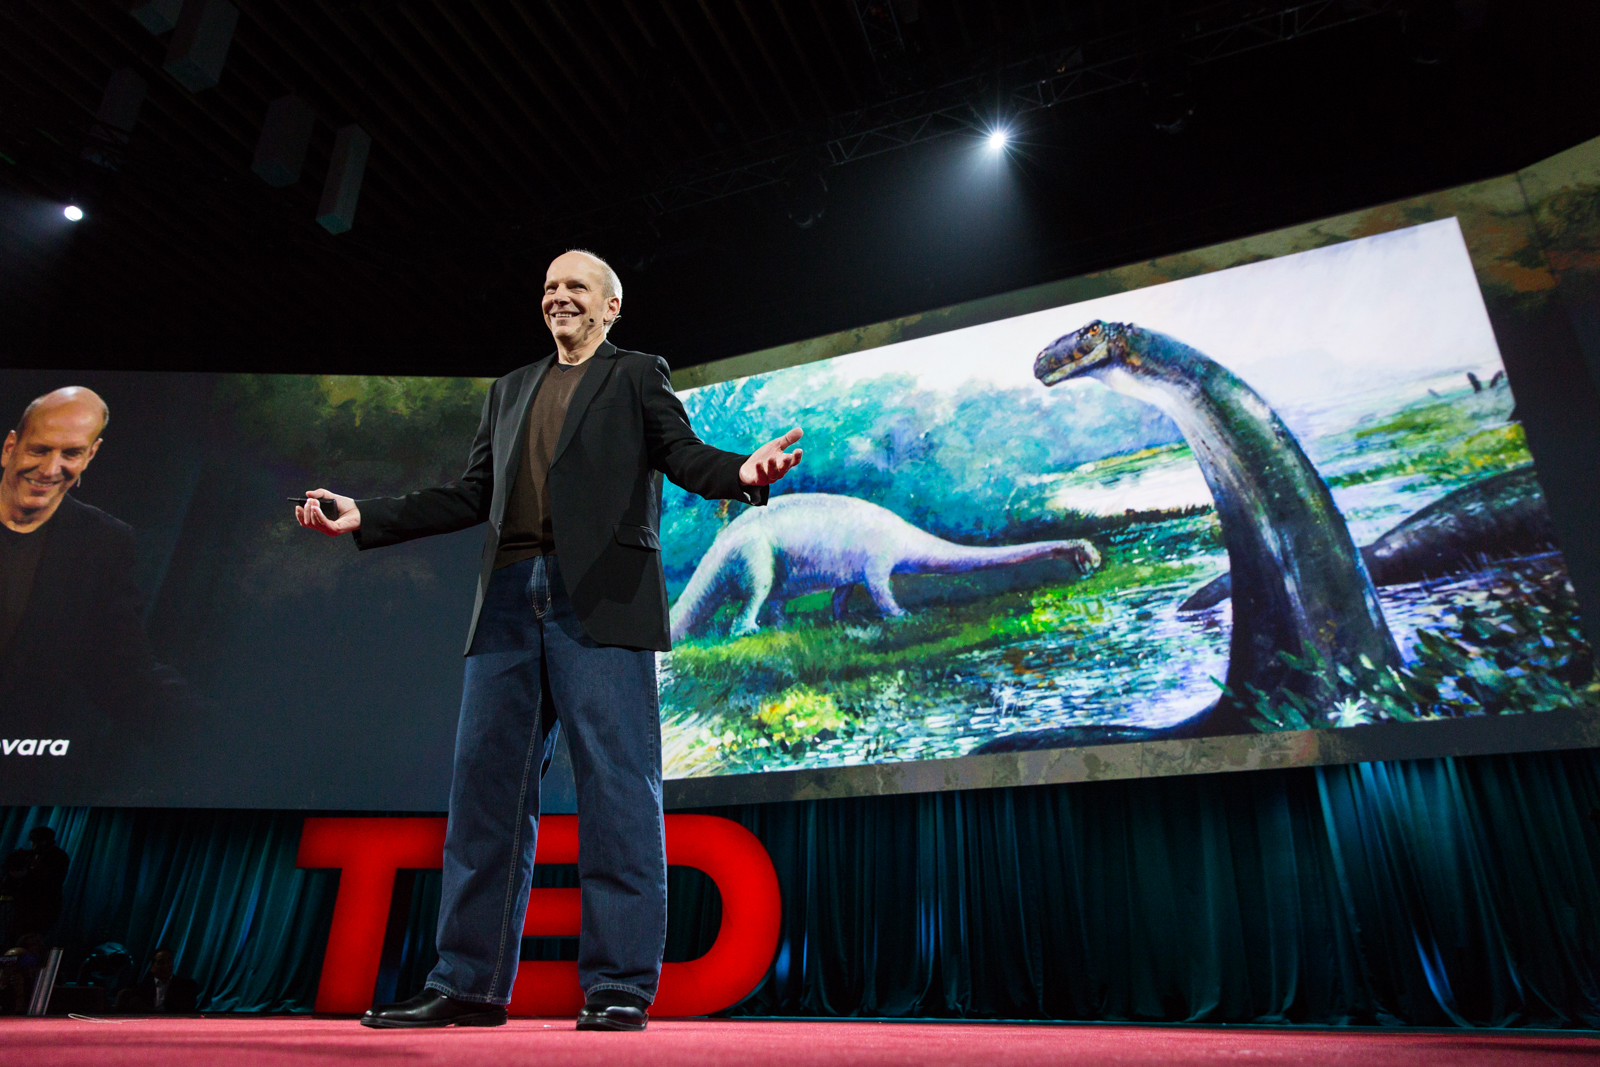 Kenneth Lacovara speaks at TED2016 - Dream, February 15-19, 2016, Vancouver Convention Center, Vancouver, Canada. Photo: Bret Hartman / TED